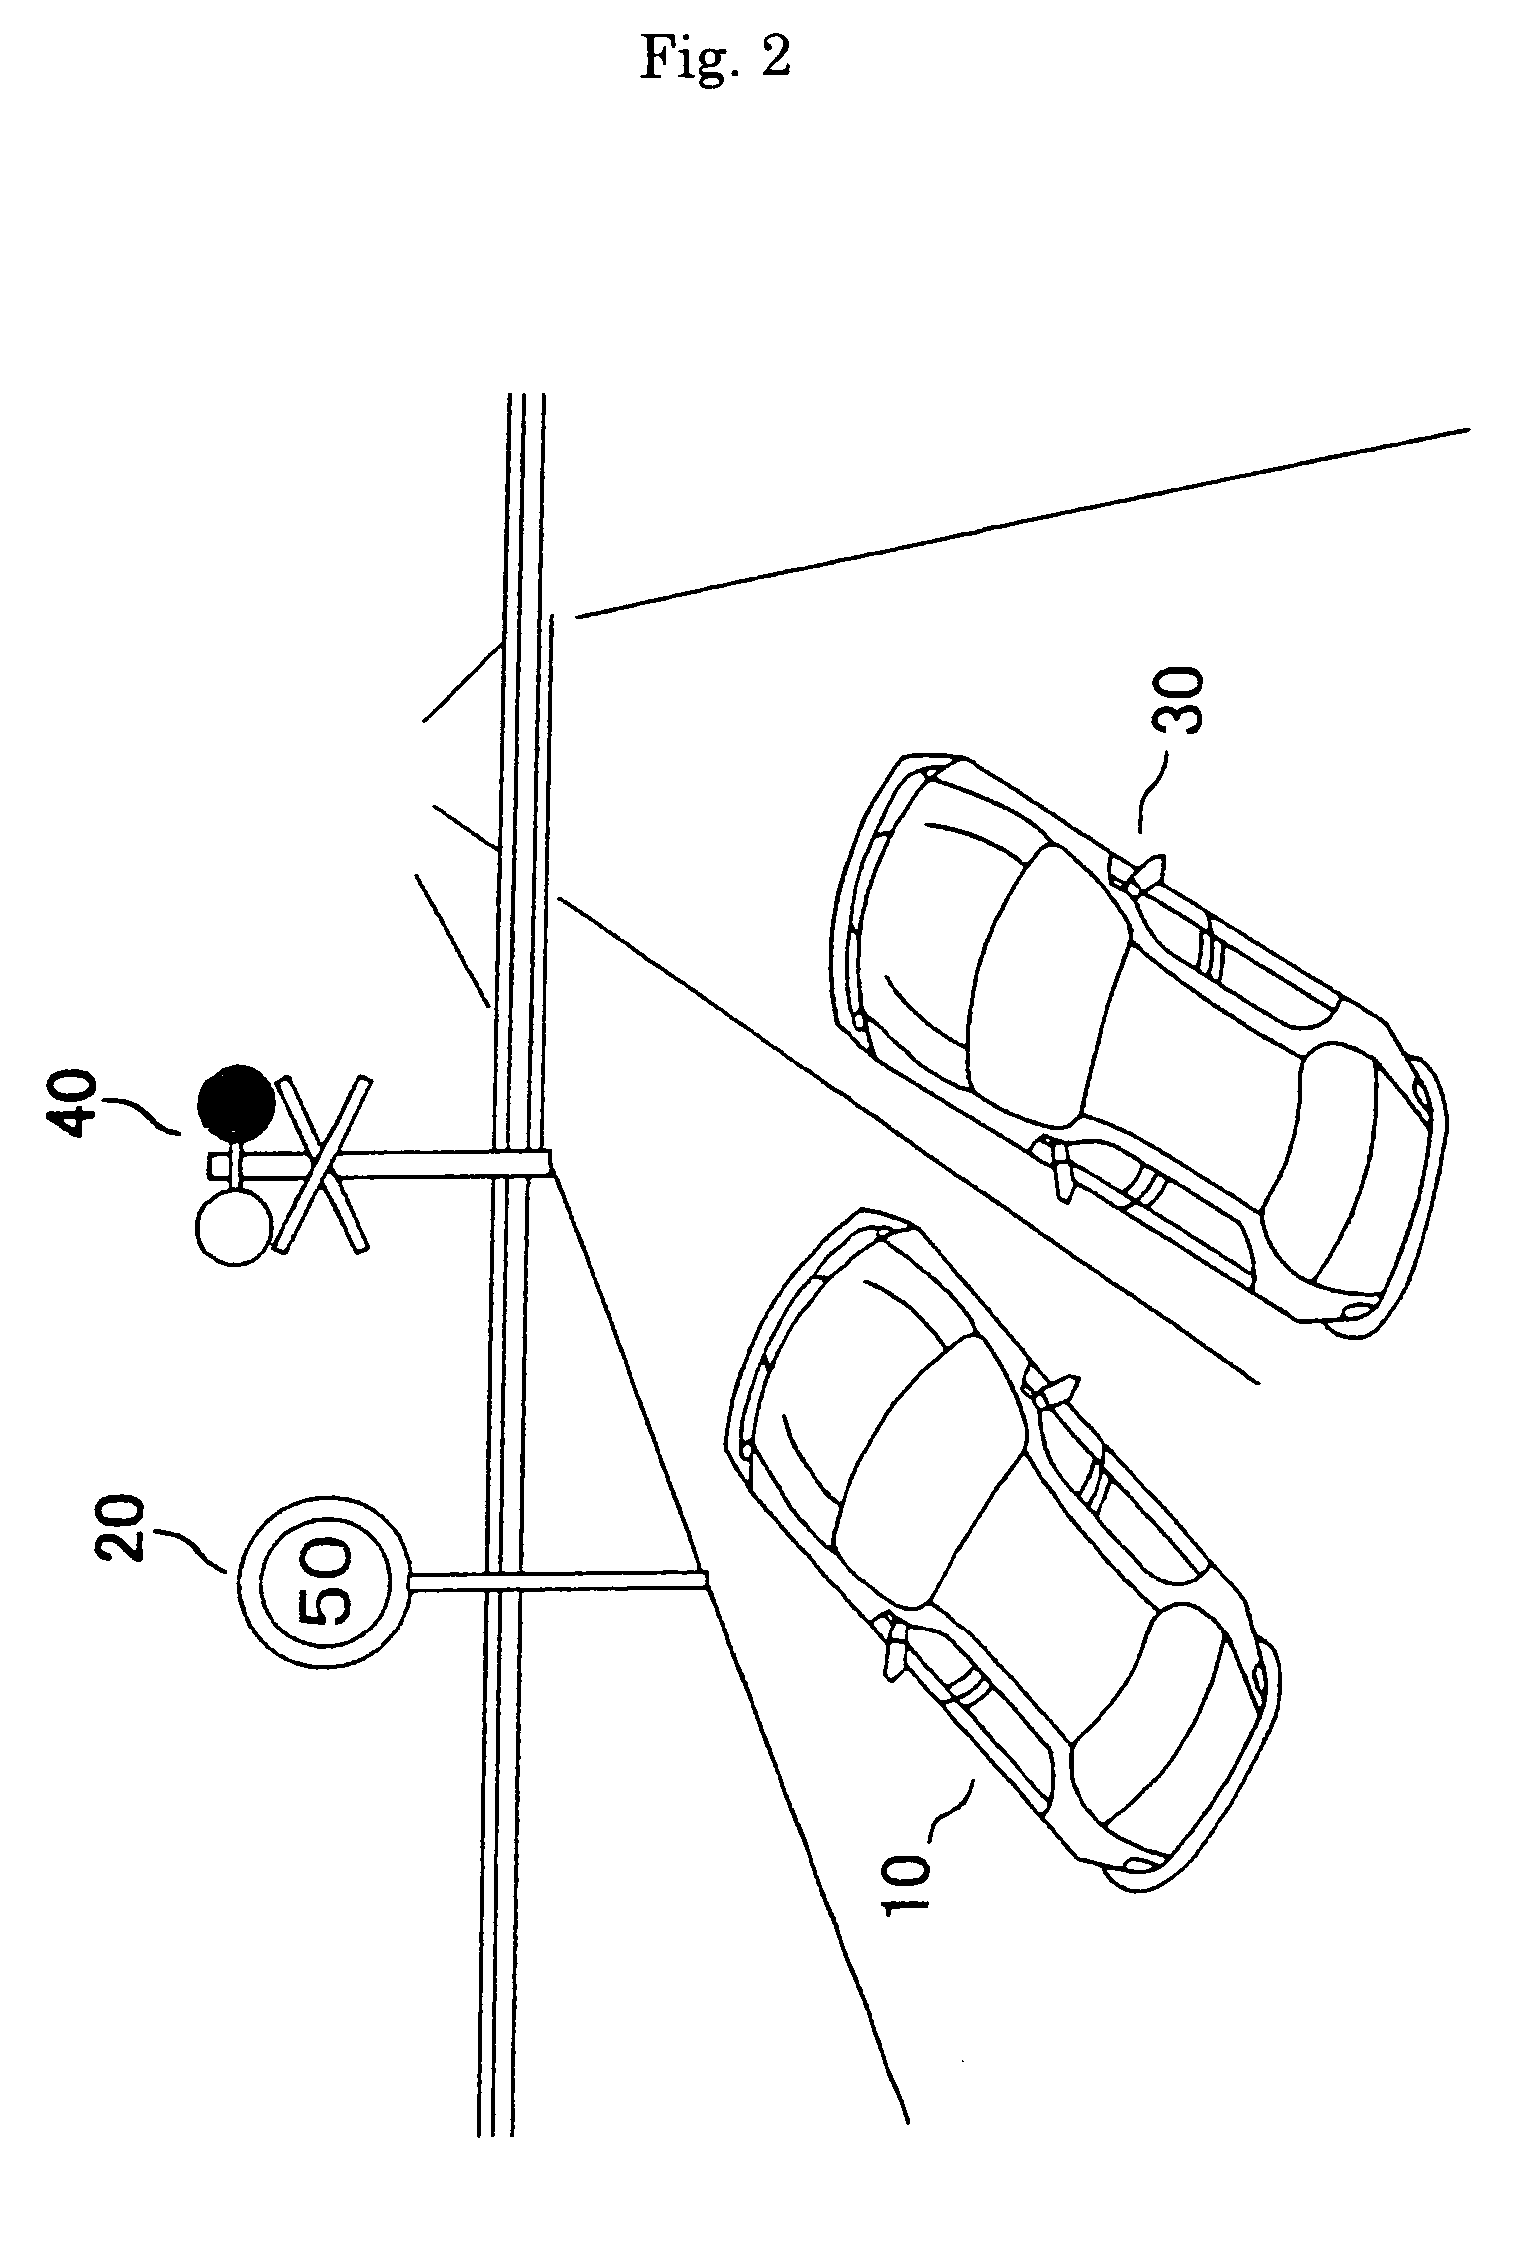 Automatic guide apparatus for traffic facilities